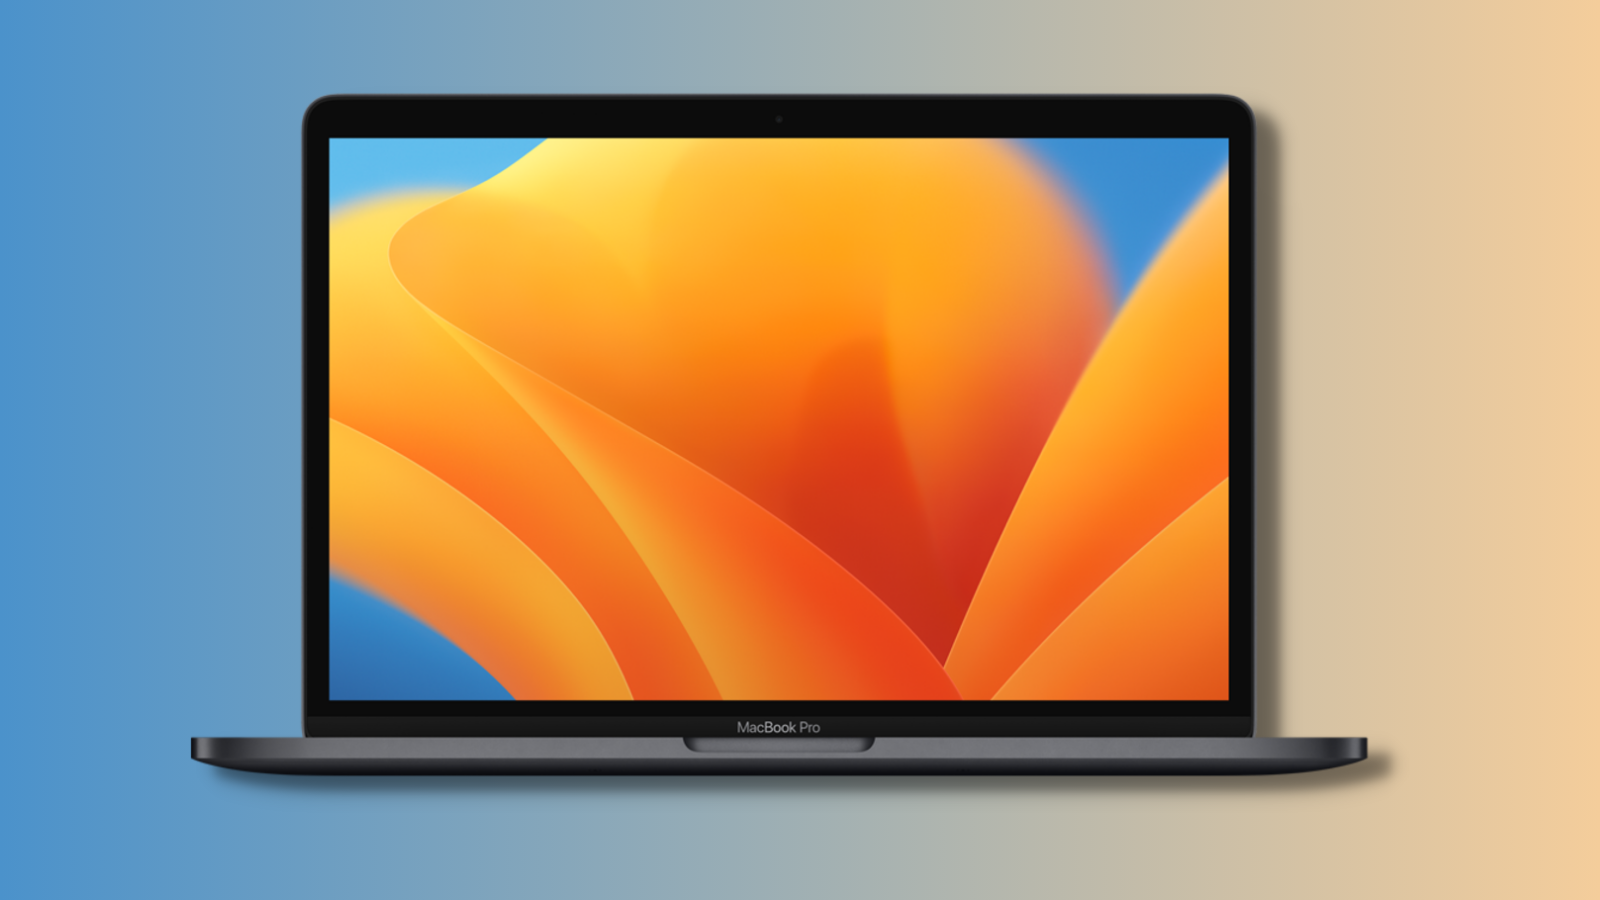 Apple MacBook Pro with blue and orange gradient background